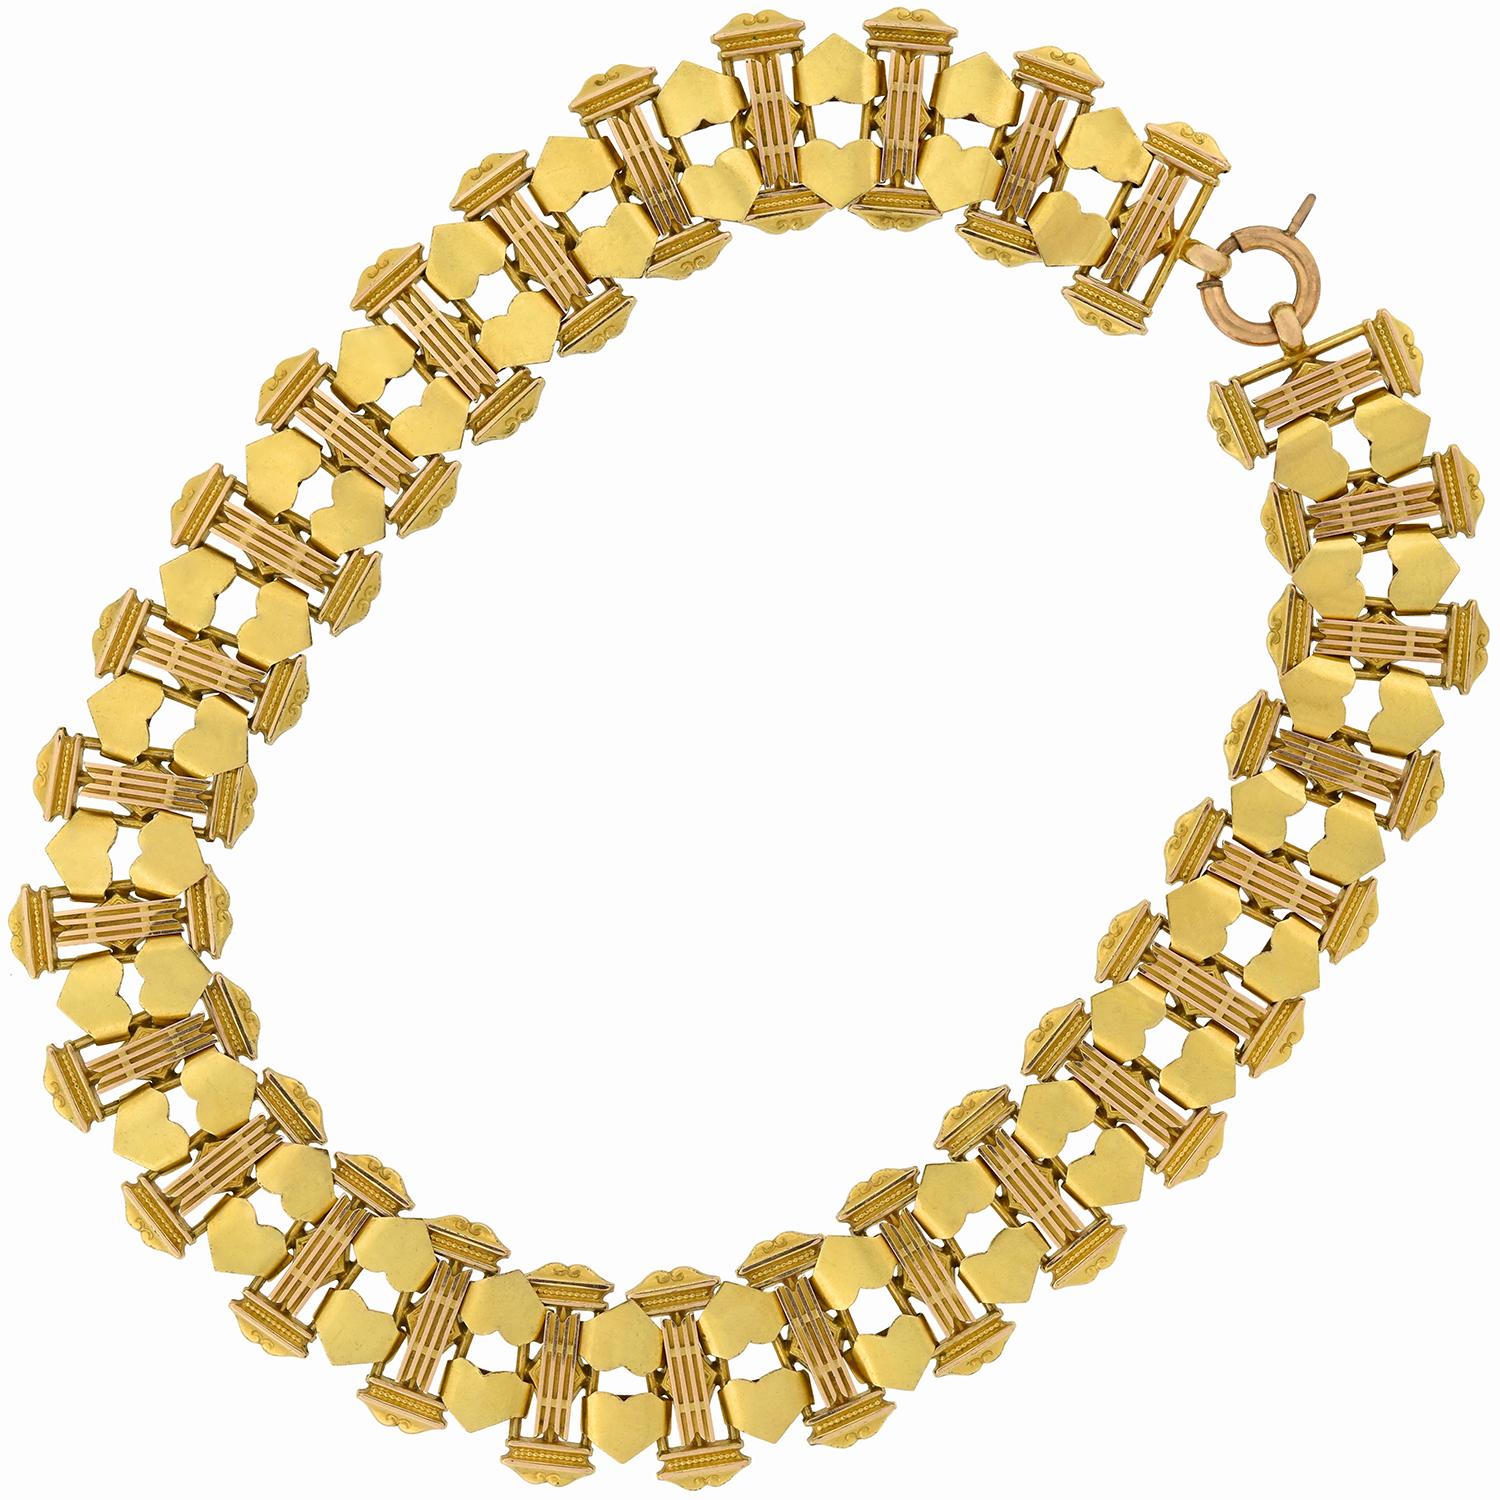 A fabulous gold book chain from the Victorian (ca1880) era! This amazing handmade piece is crafted in rich 15kt yellow gold and comprised of alternating Roman column and heart shaped links which carry around the entire length. The rectangular column